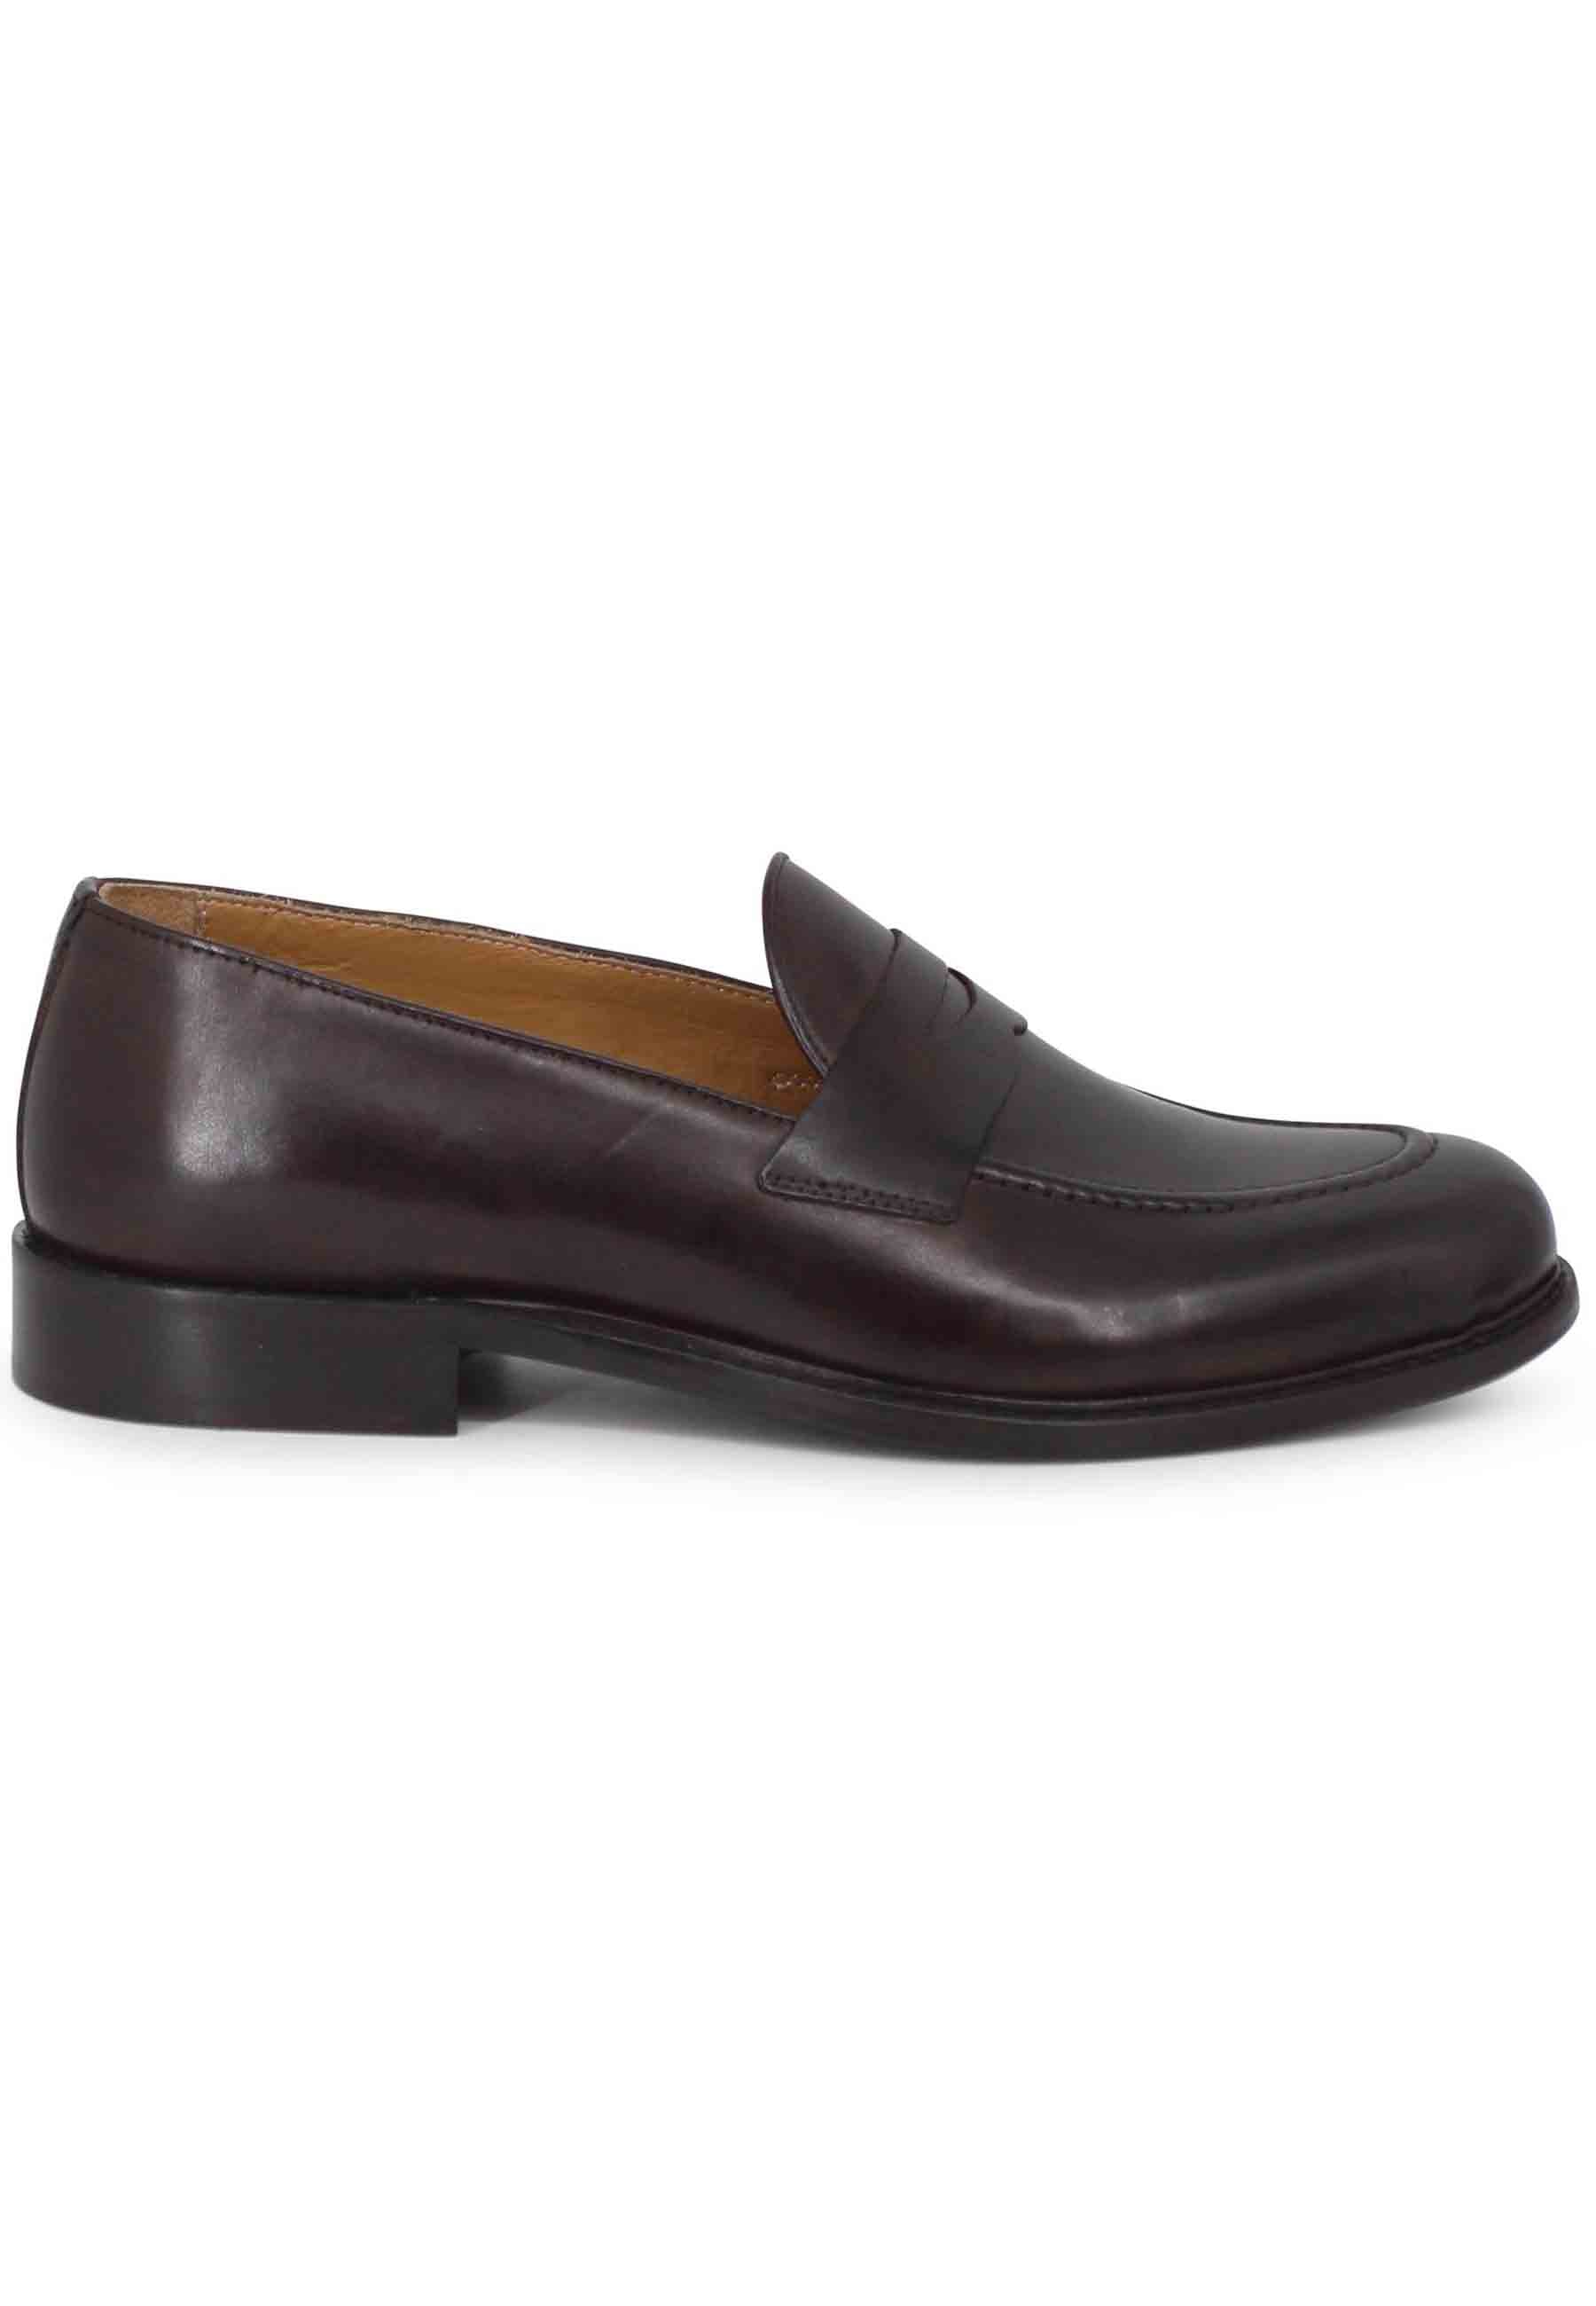 Men's brown leather loafers with leather sole